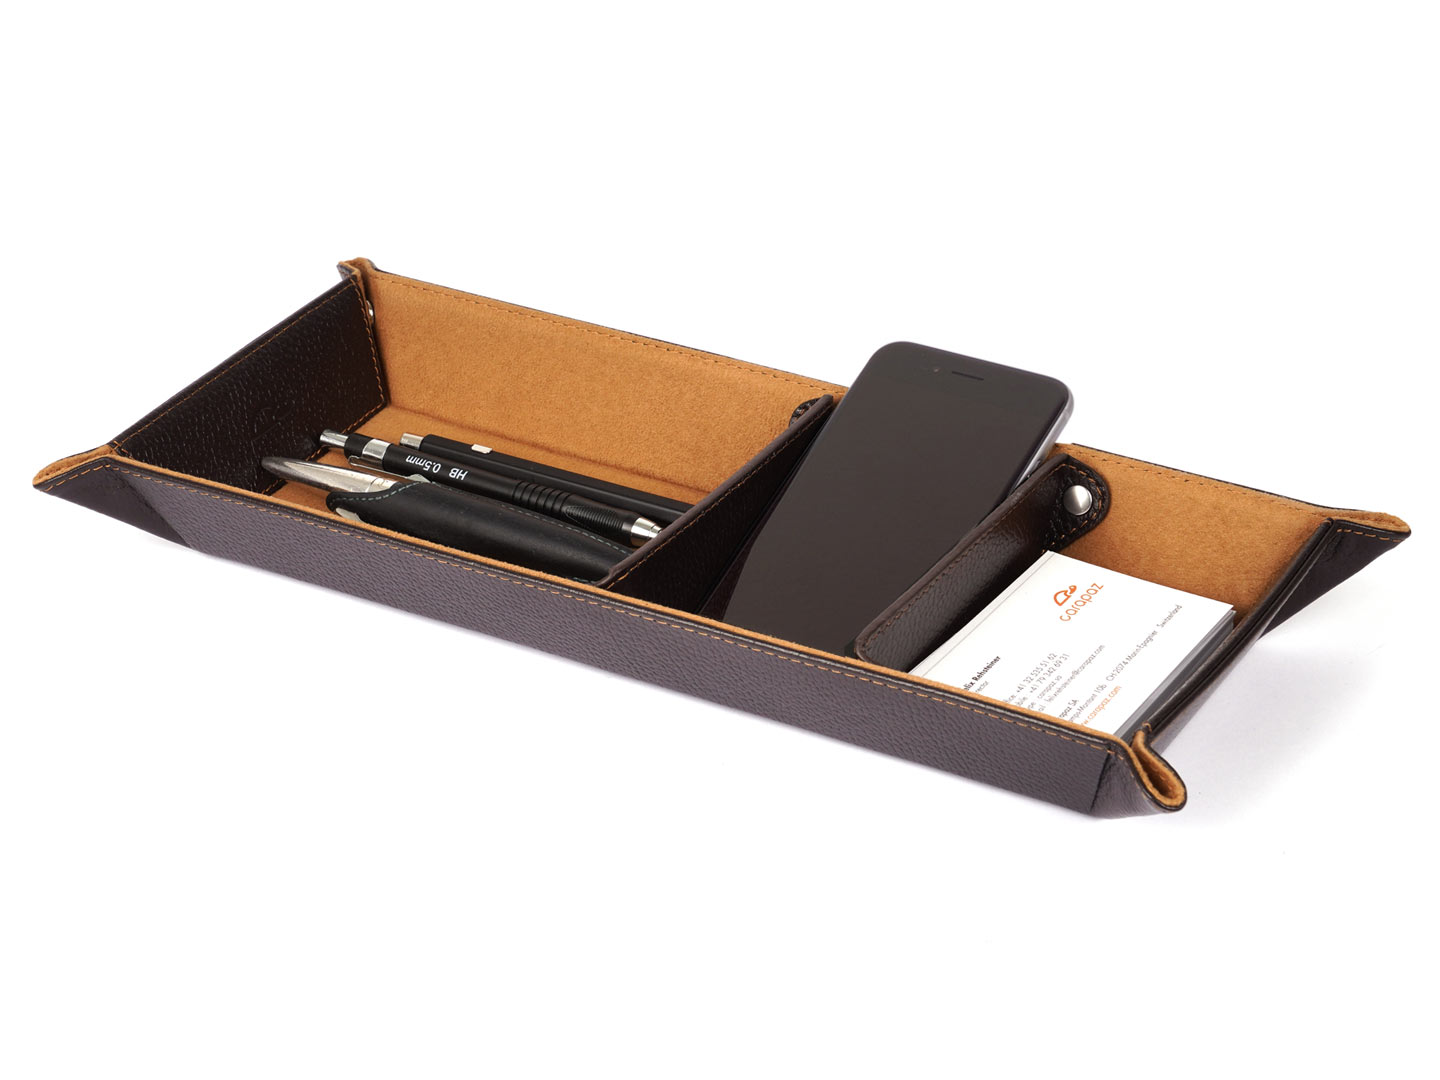 Leather Pencil Case | Brown Pencil Holder